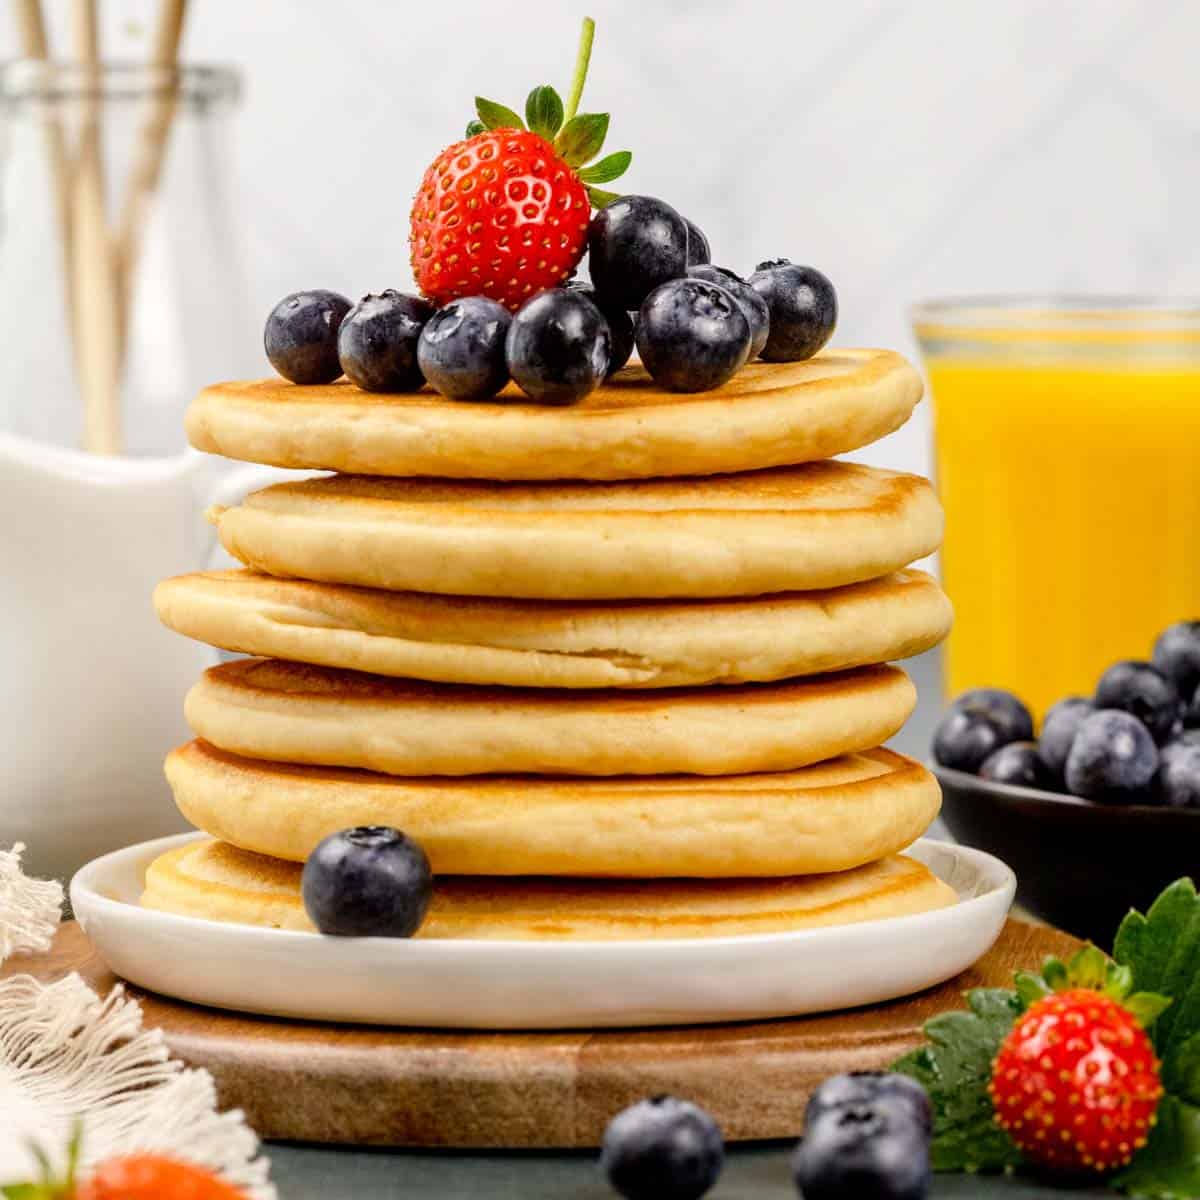 Tall stack of protein pancakes topped with fresh berries on a white plate. More fresh berries surround the plate and a glass of orange juice is blurred in the background.